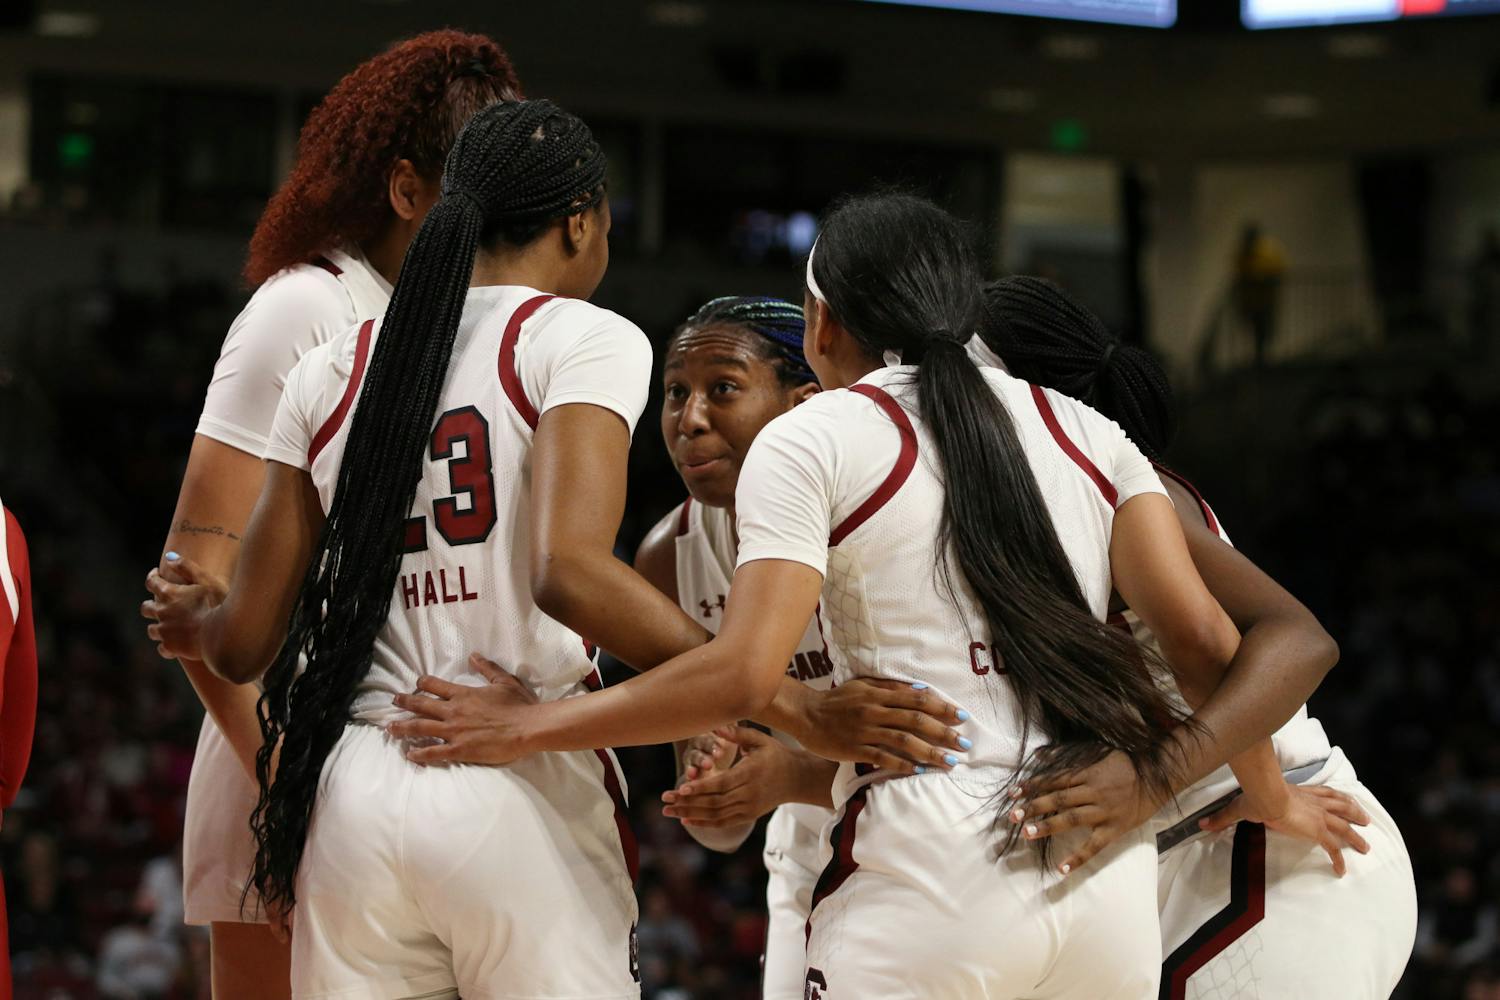 The Gamecocks huddle up after a play on Jan. 22, 2023. The Gamecocks defeated Arkansas 92-46.&nbsp;